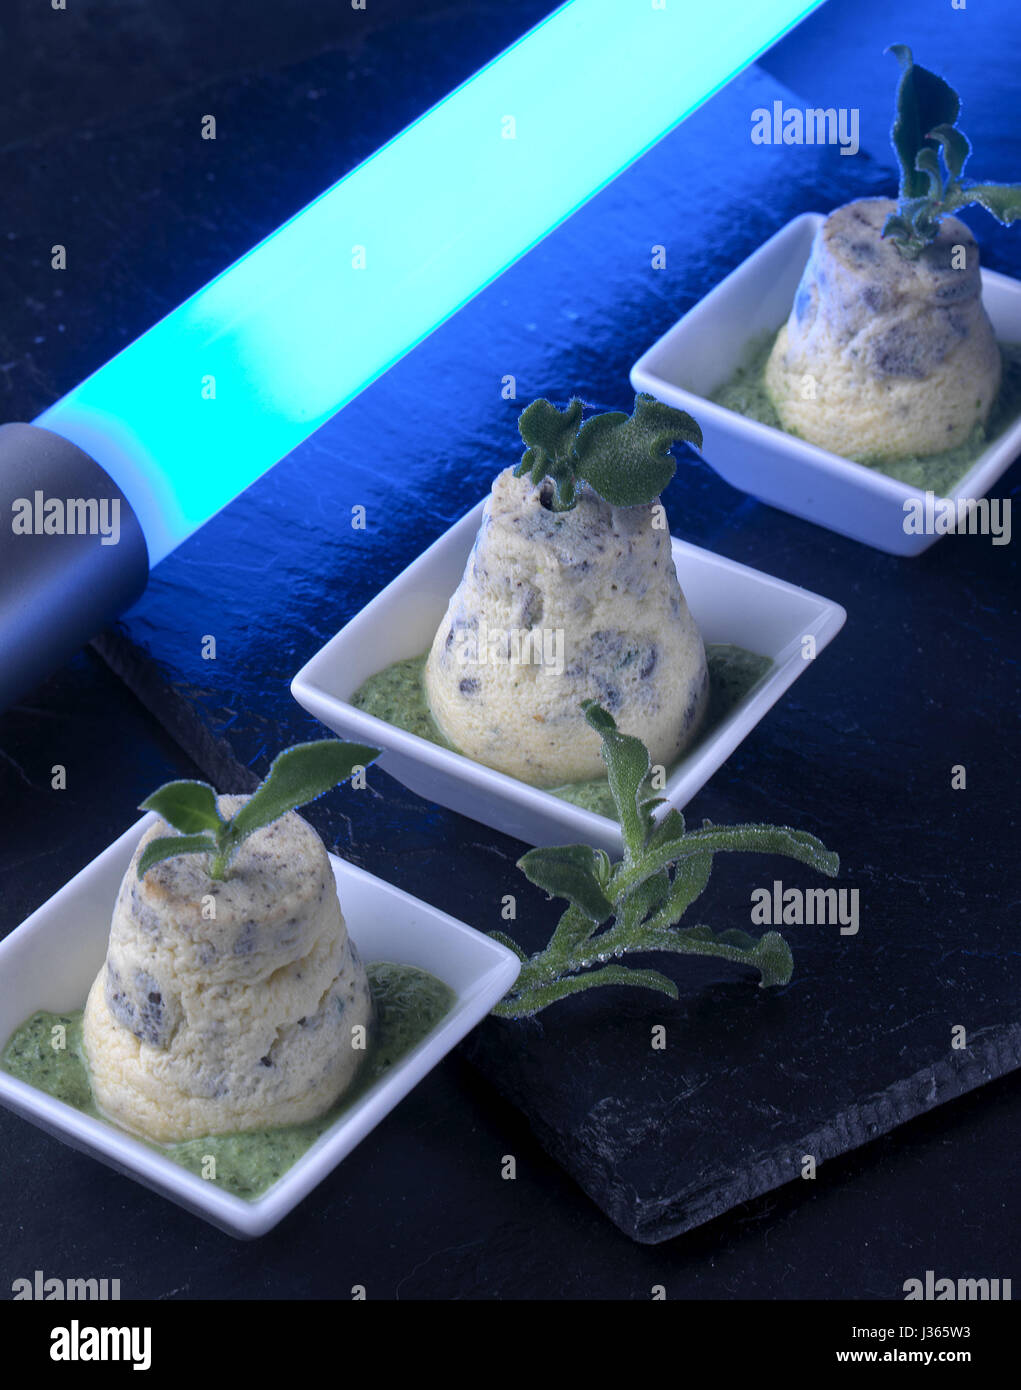 March, Totally Space theme dinner: flans with snails, parsley pesto Stock Photo